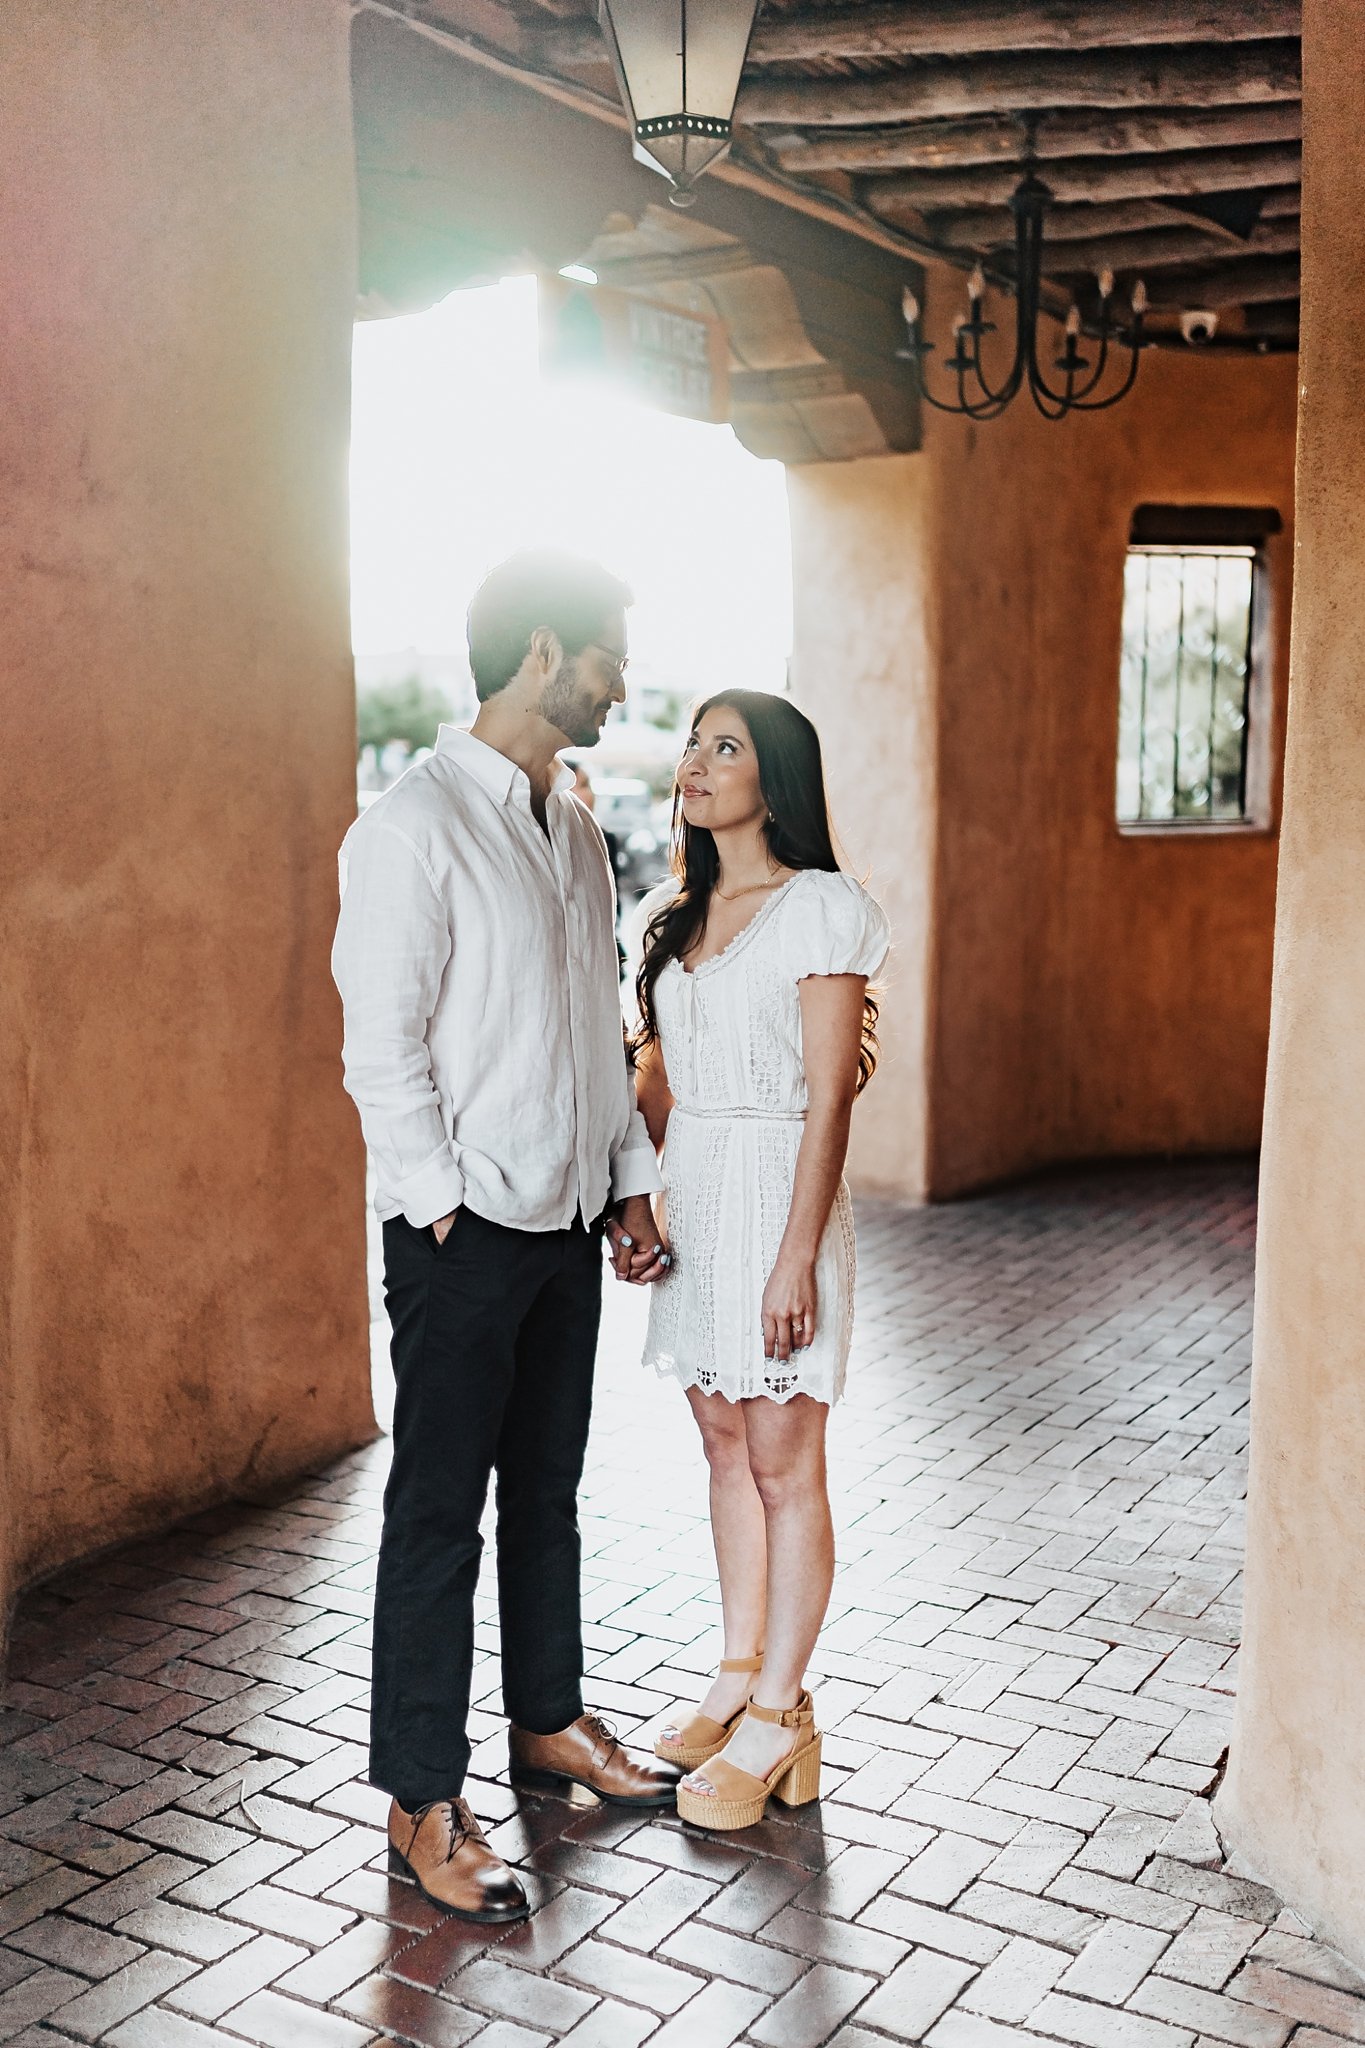 Alicia+lucia+photography+-+albuquerque+wedding+photographer+-+santa+fe+wedding+photography+-+new+mexico+wedding+photographer+-+new+mexico+wedding+-+old+town+engagement+-+old+town+wedding+-+southwest+engagement_0007.jpg